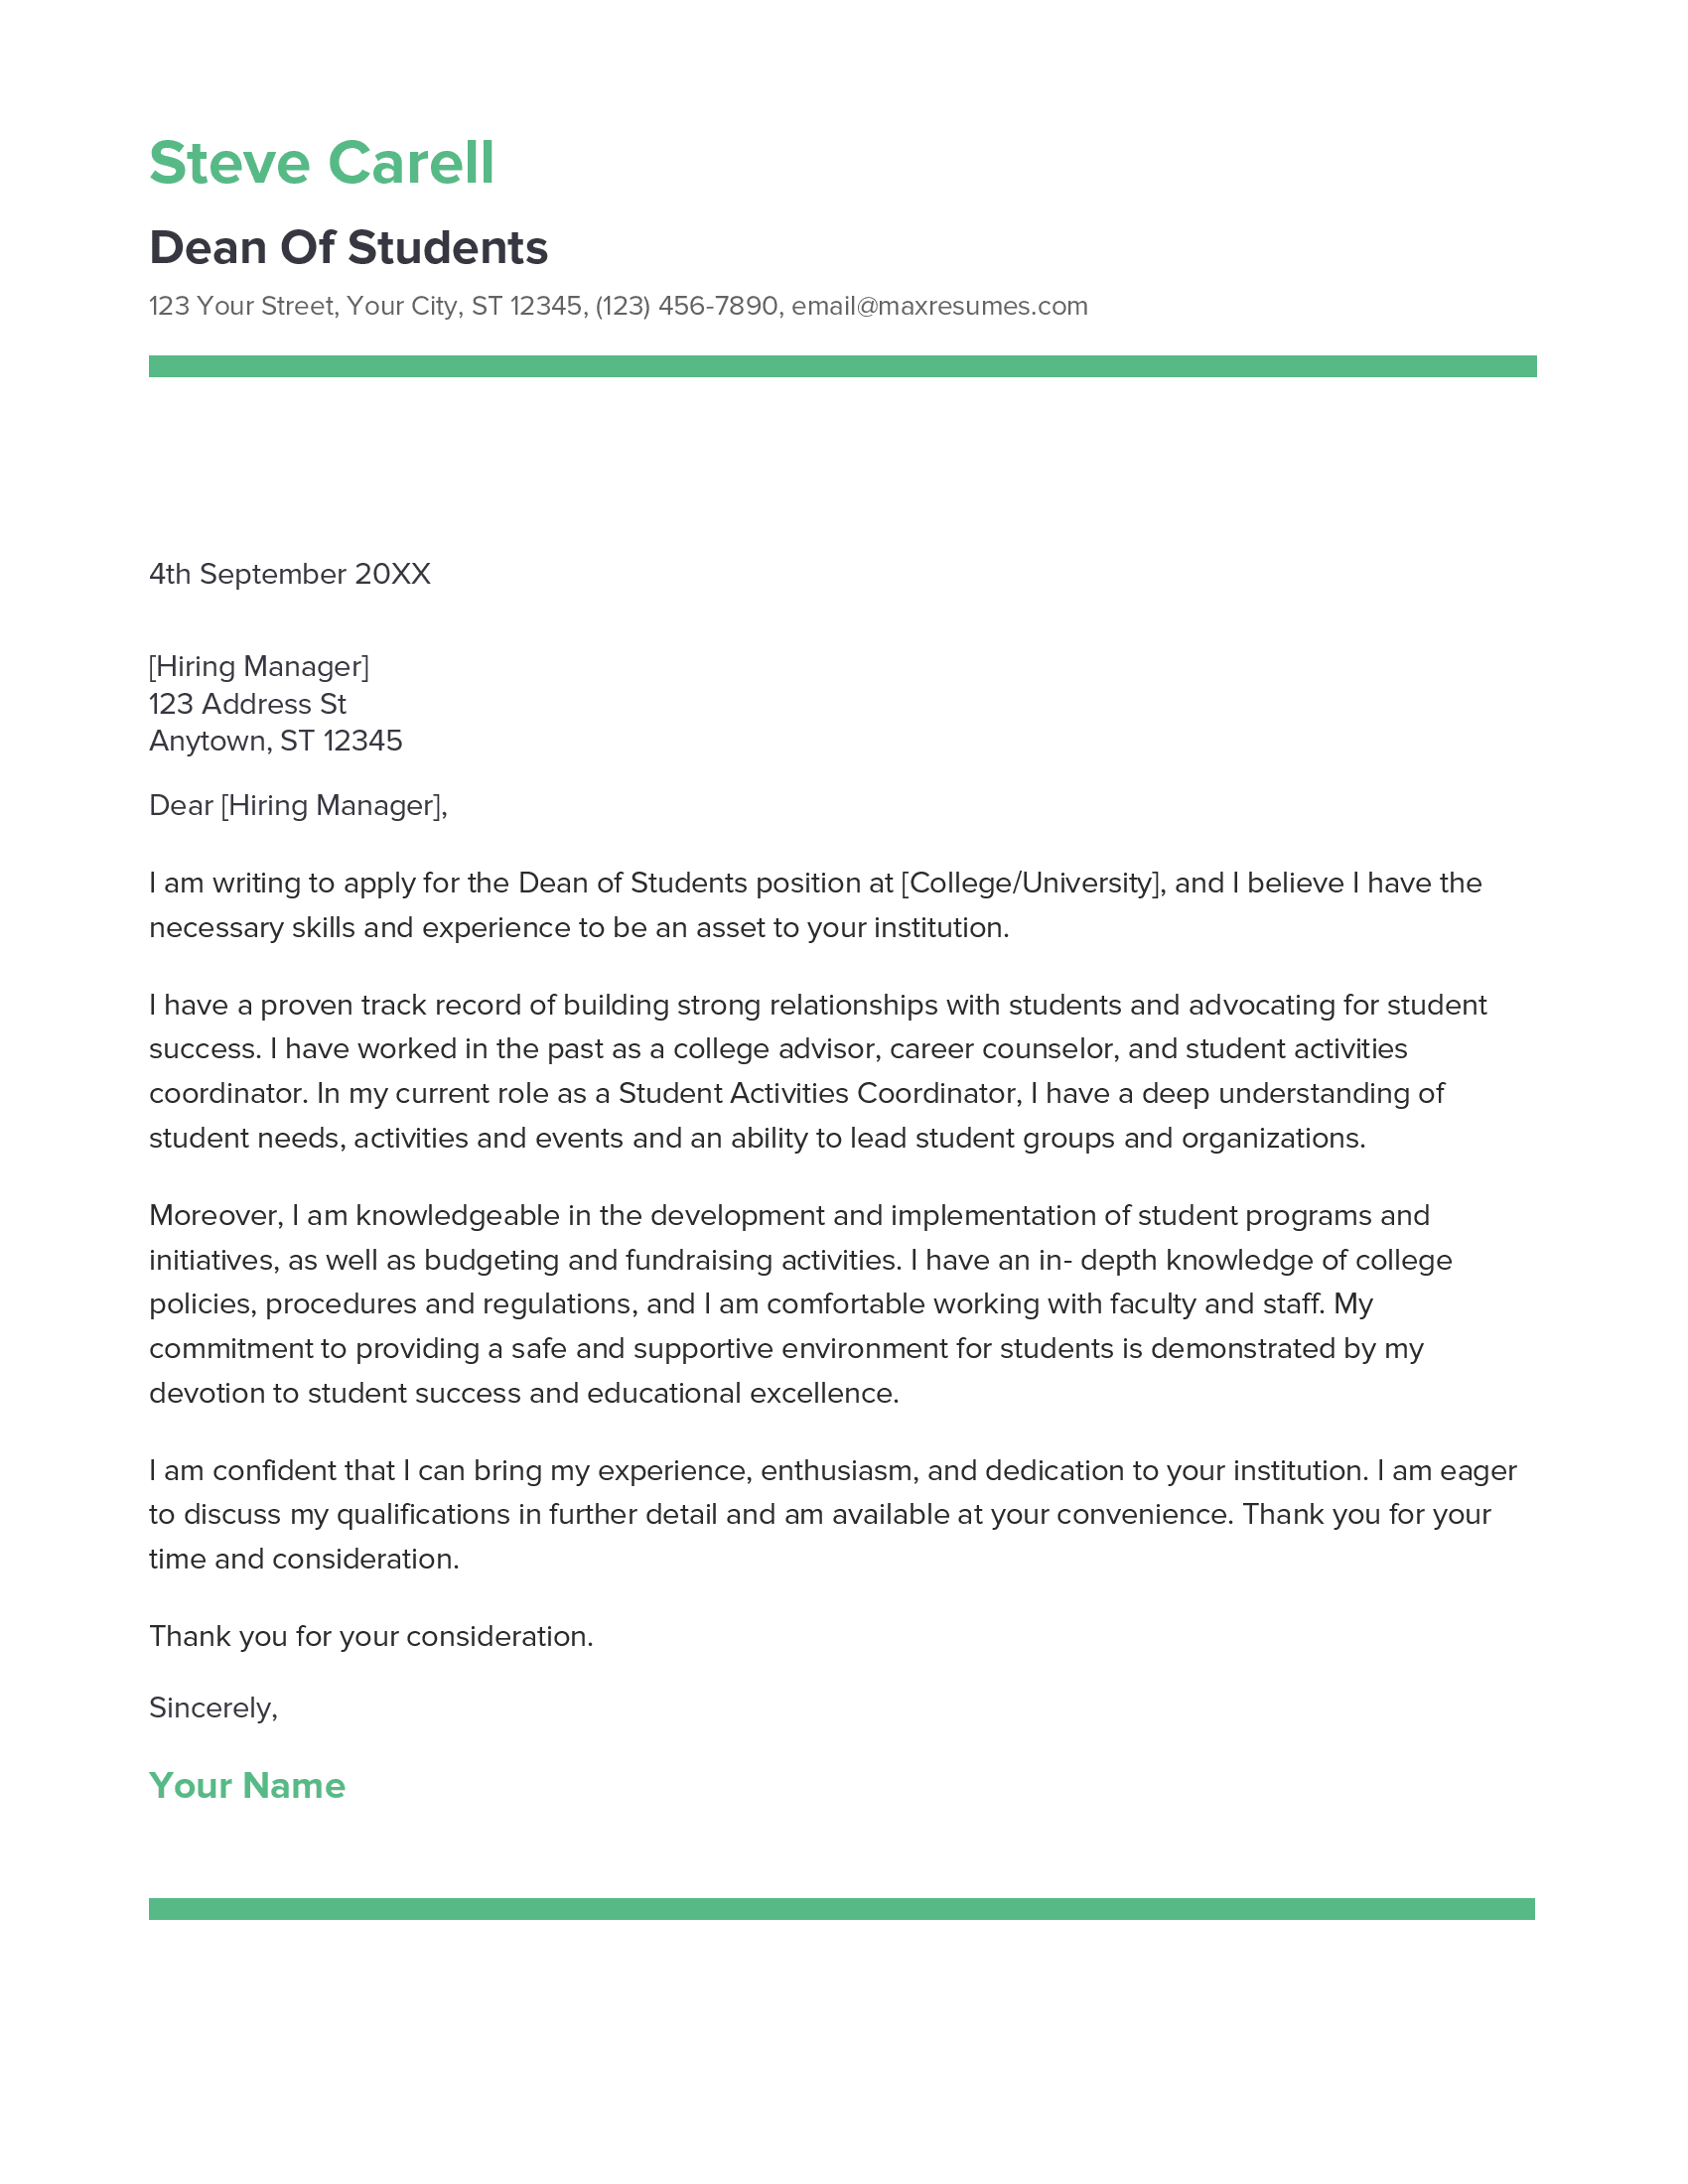 Dean Of Students Cover Letter Example